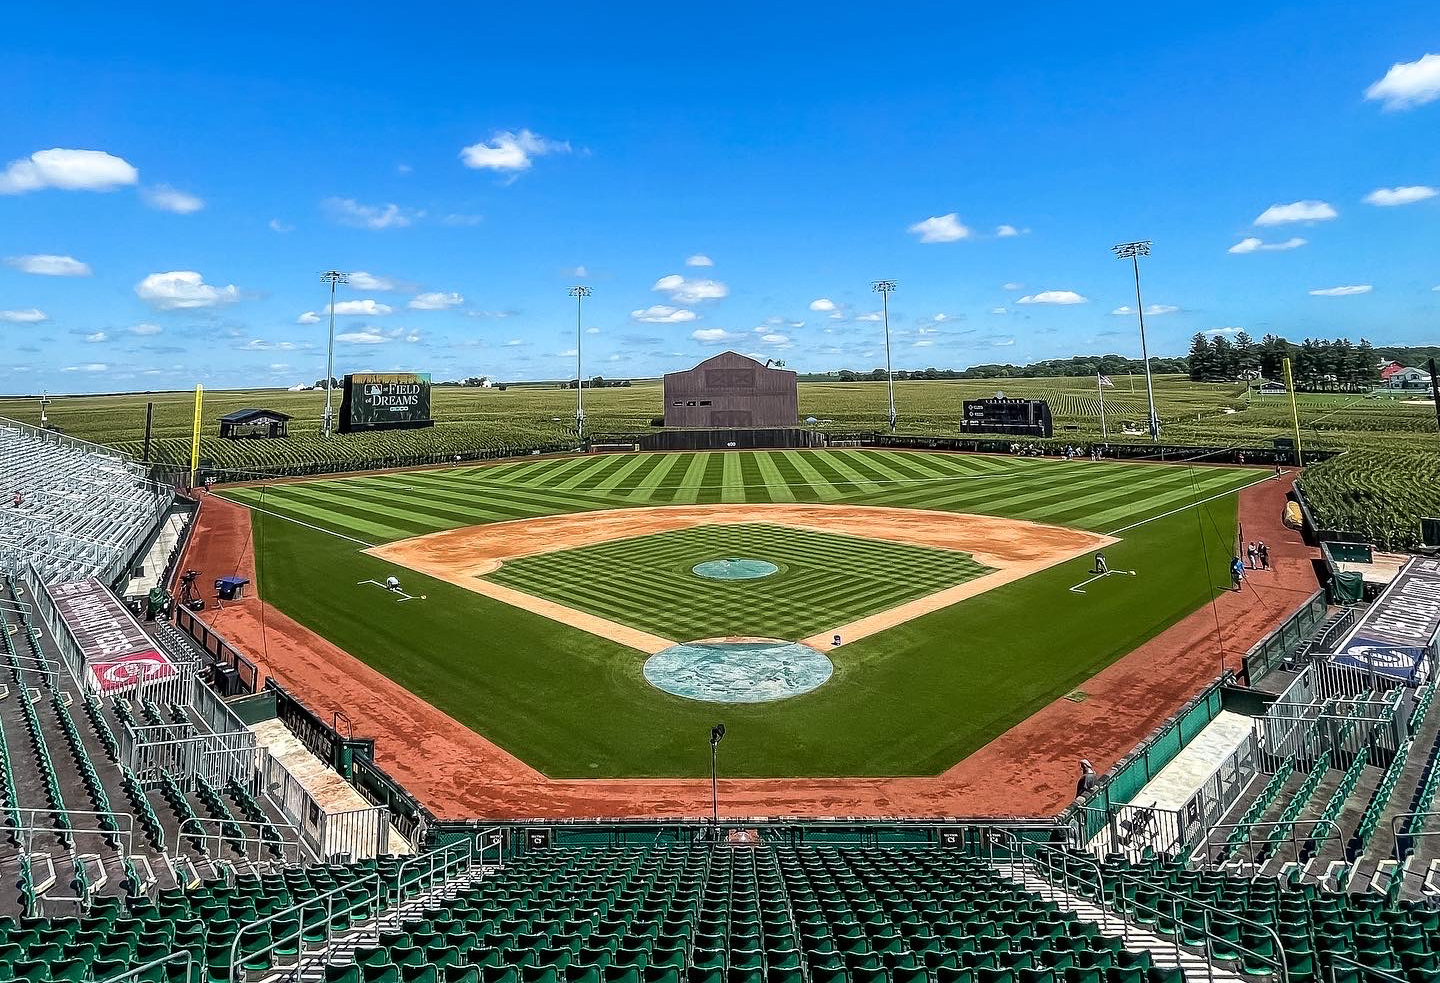 Get your MLB 'Field of Dreams' gear ahead of Cubs-Reds game in Iowa 